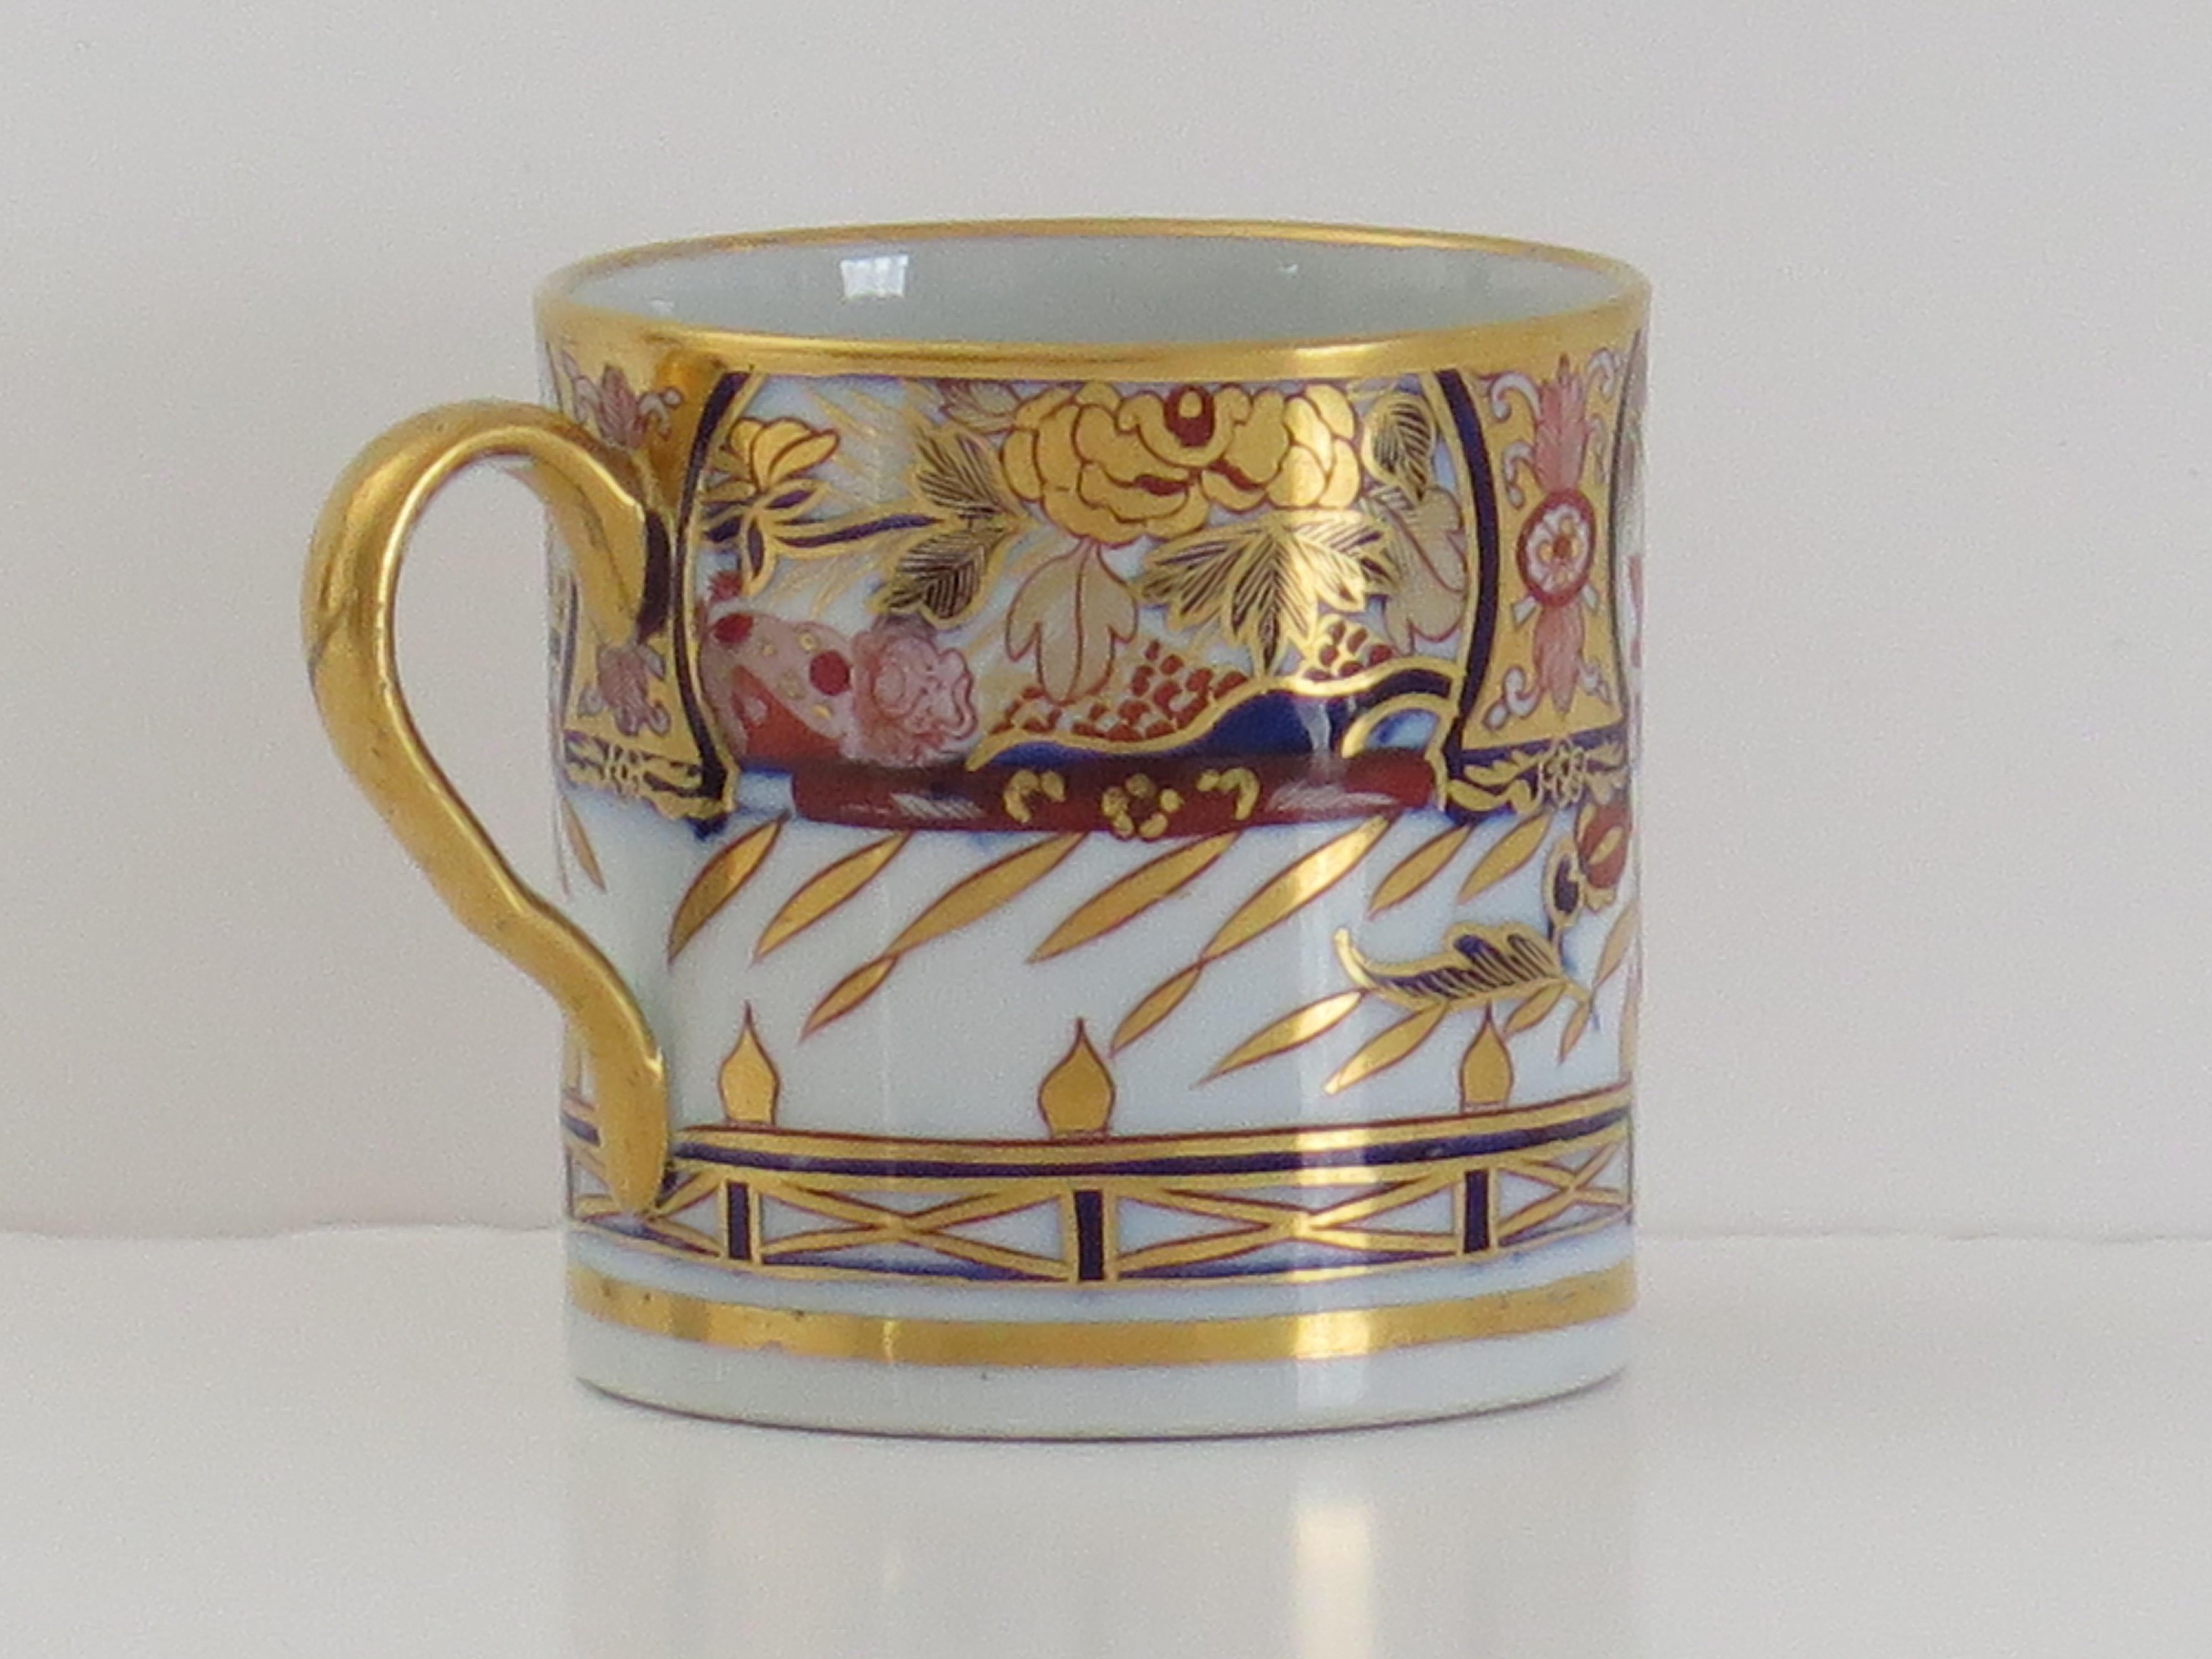 This is a very high quality Coffee Can by the Coalport Porcelain works, Shropshire, England, made during the John Rose period of the late Georgian years, circa 1805.

The coffee can is nominally parallel, tapering slightly to the base, with a simple